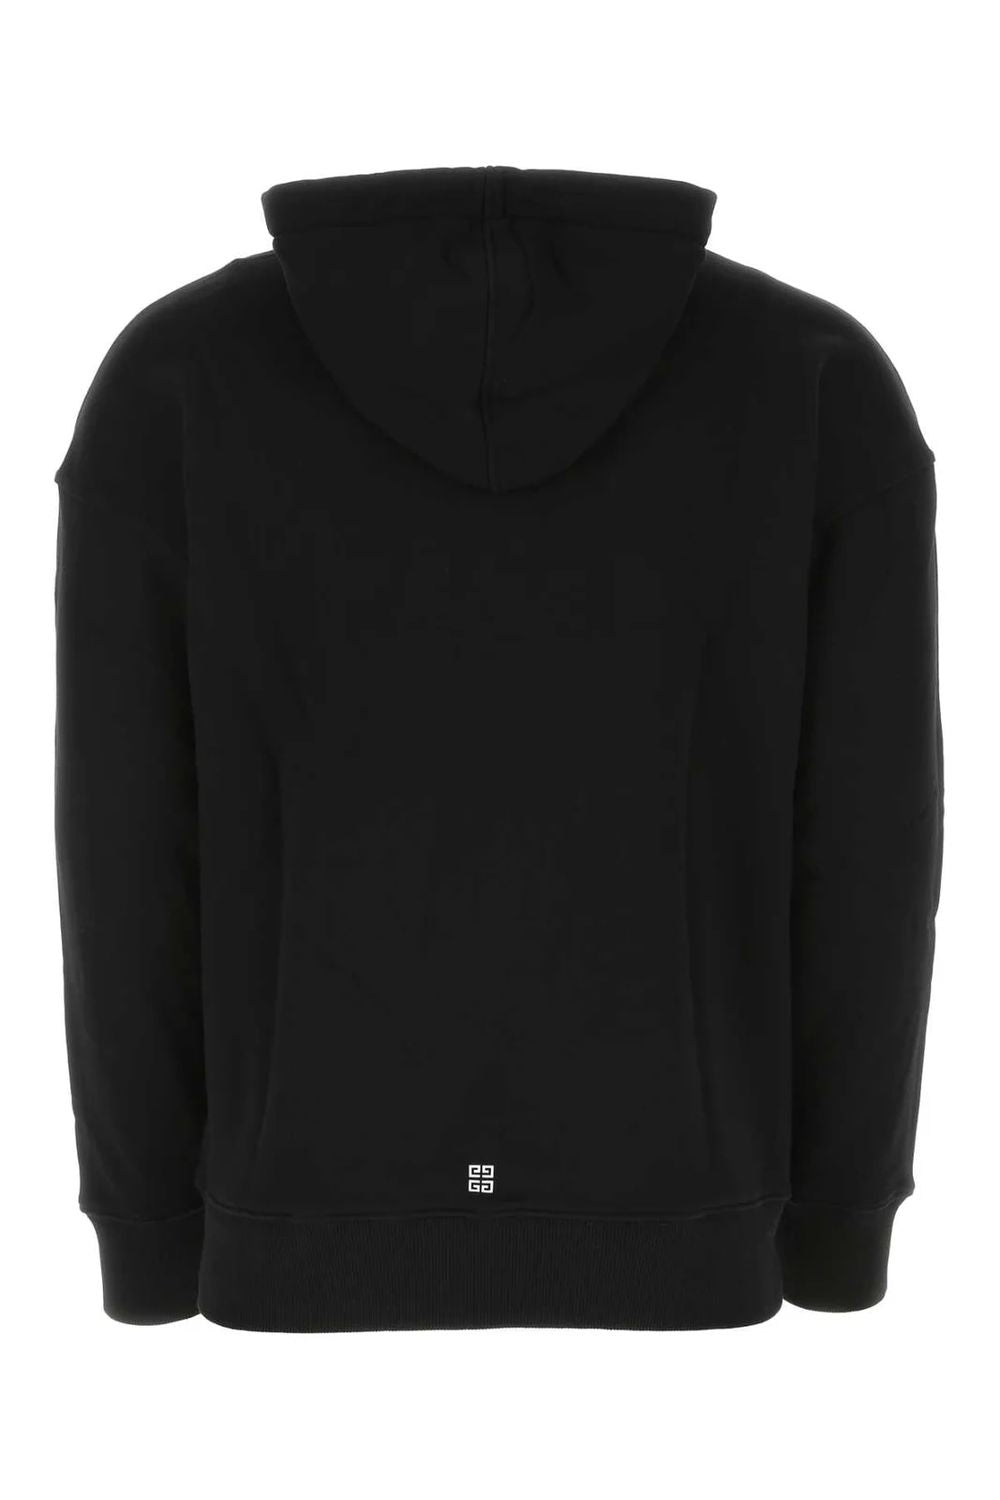 GIVENCHY Black Slim Fit Hoodie for Men - SS24 Collection